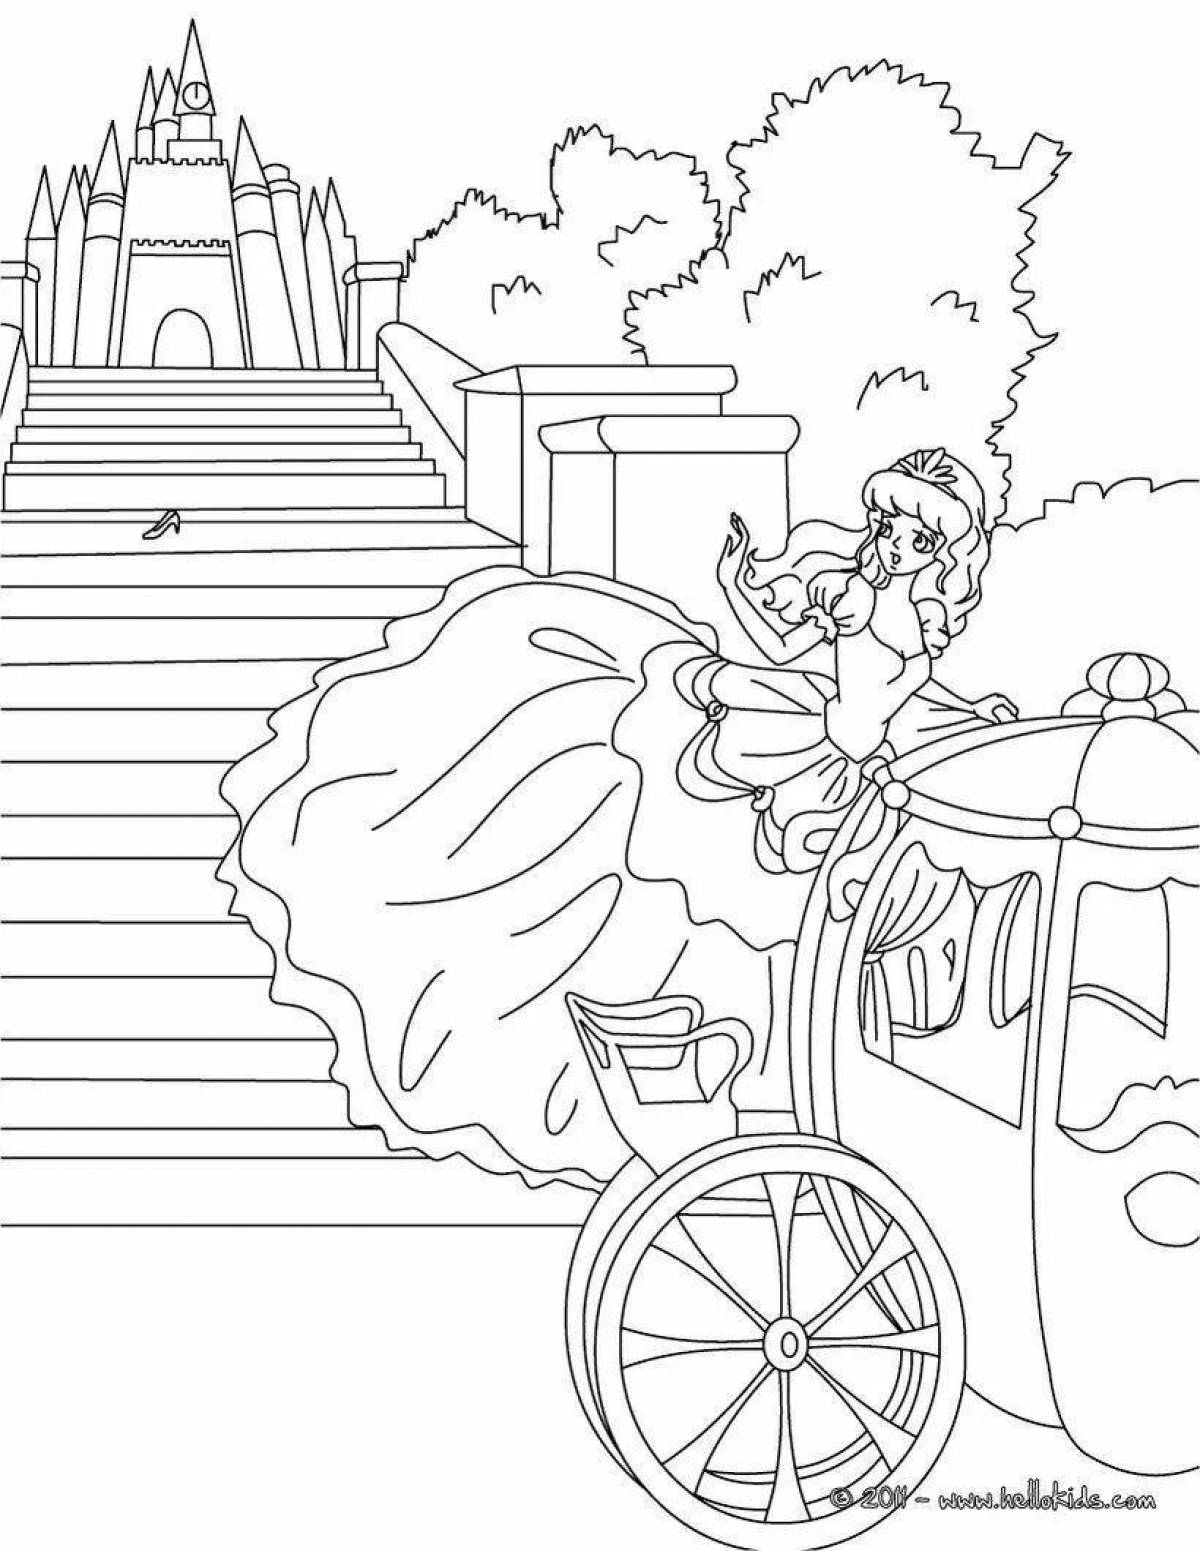 Coloring page charming cinderella and charles perrault